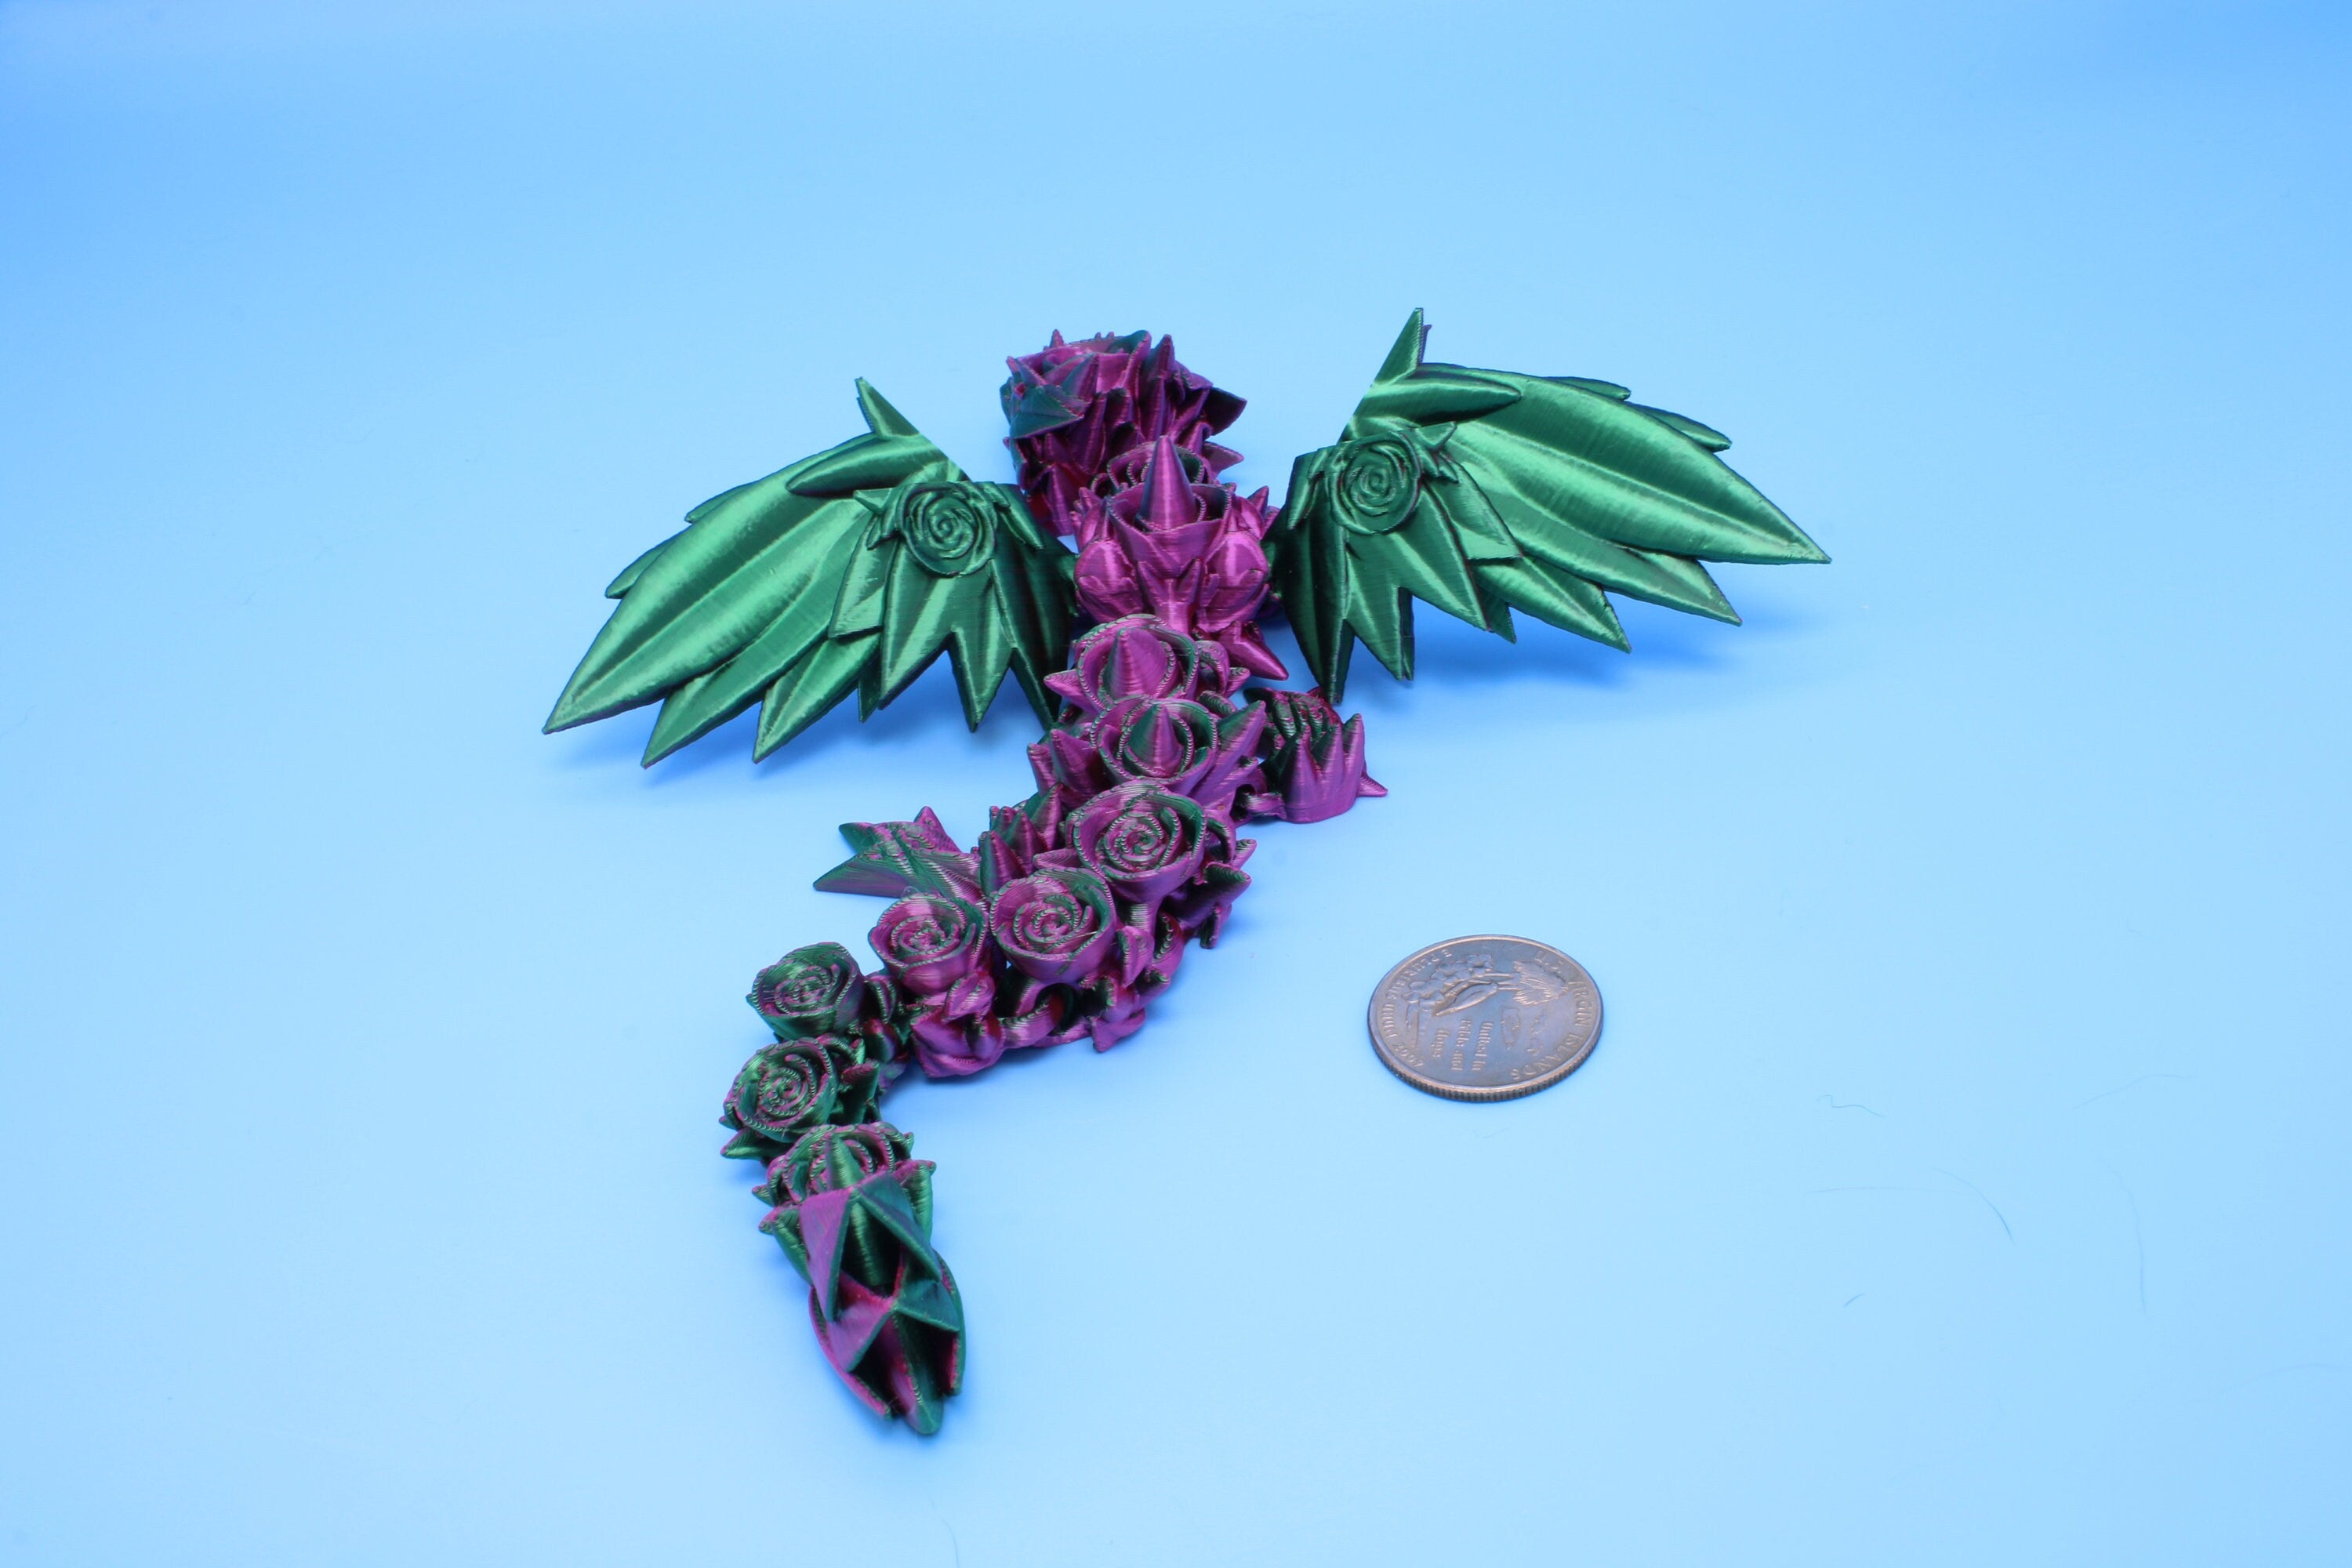 Miniature Baby Rose Wing Dragon, 3D Printed 8.5 in.